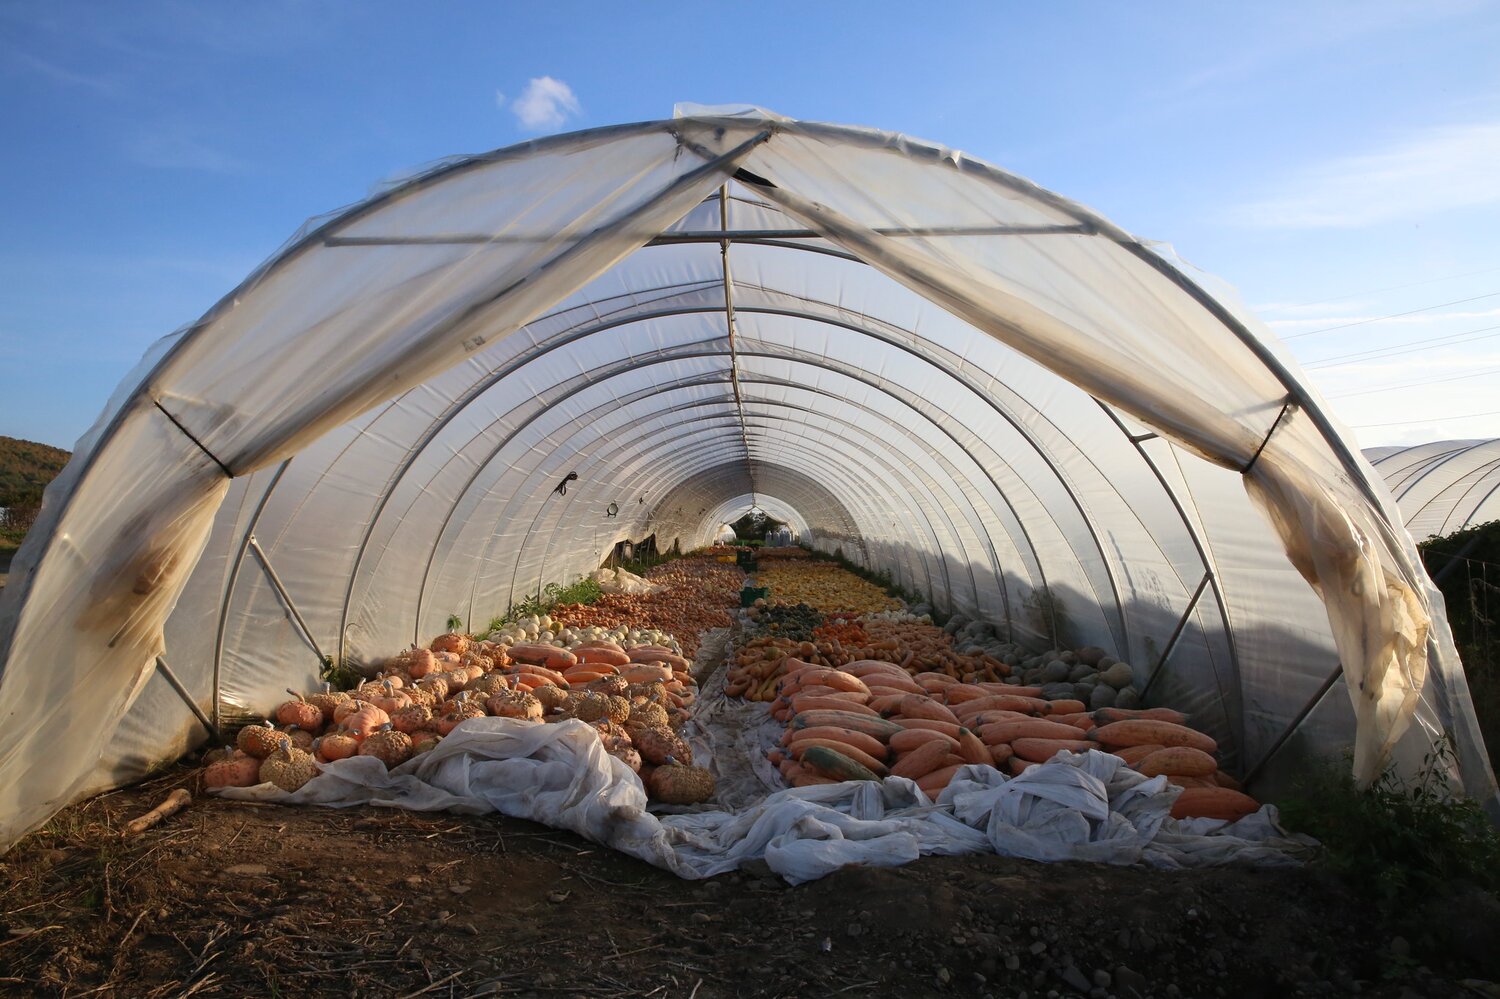 Norwich Meadows Farm in Chenango County, New York, spans over 200 acres, where a lot of the crops are grown in “high tunnels”, which can extend the seasons and allow the farm-workers to work standing up, instead of bending over. Photo: Crop Trust/Luis Salazar